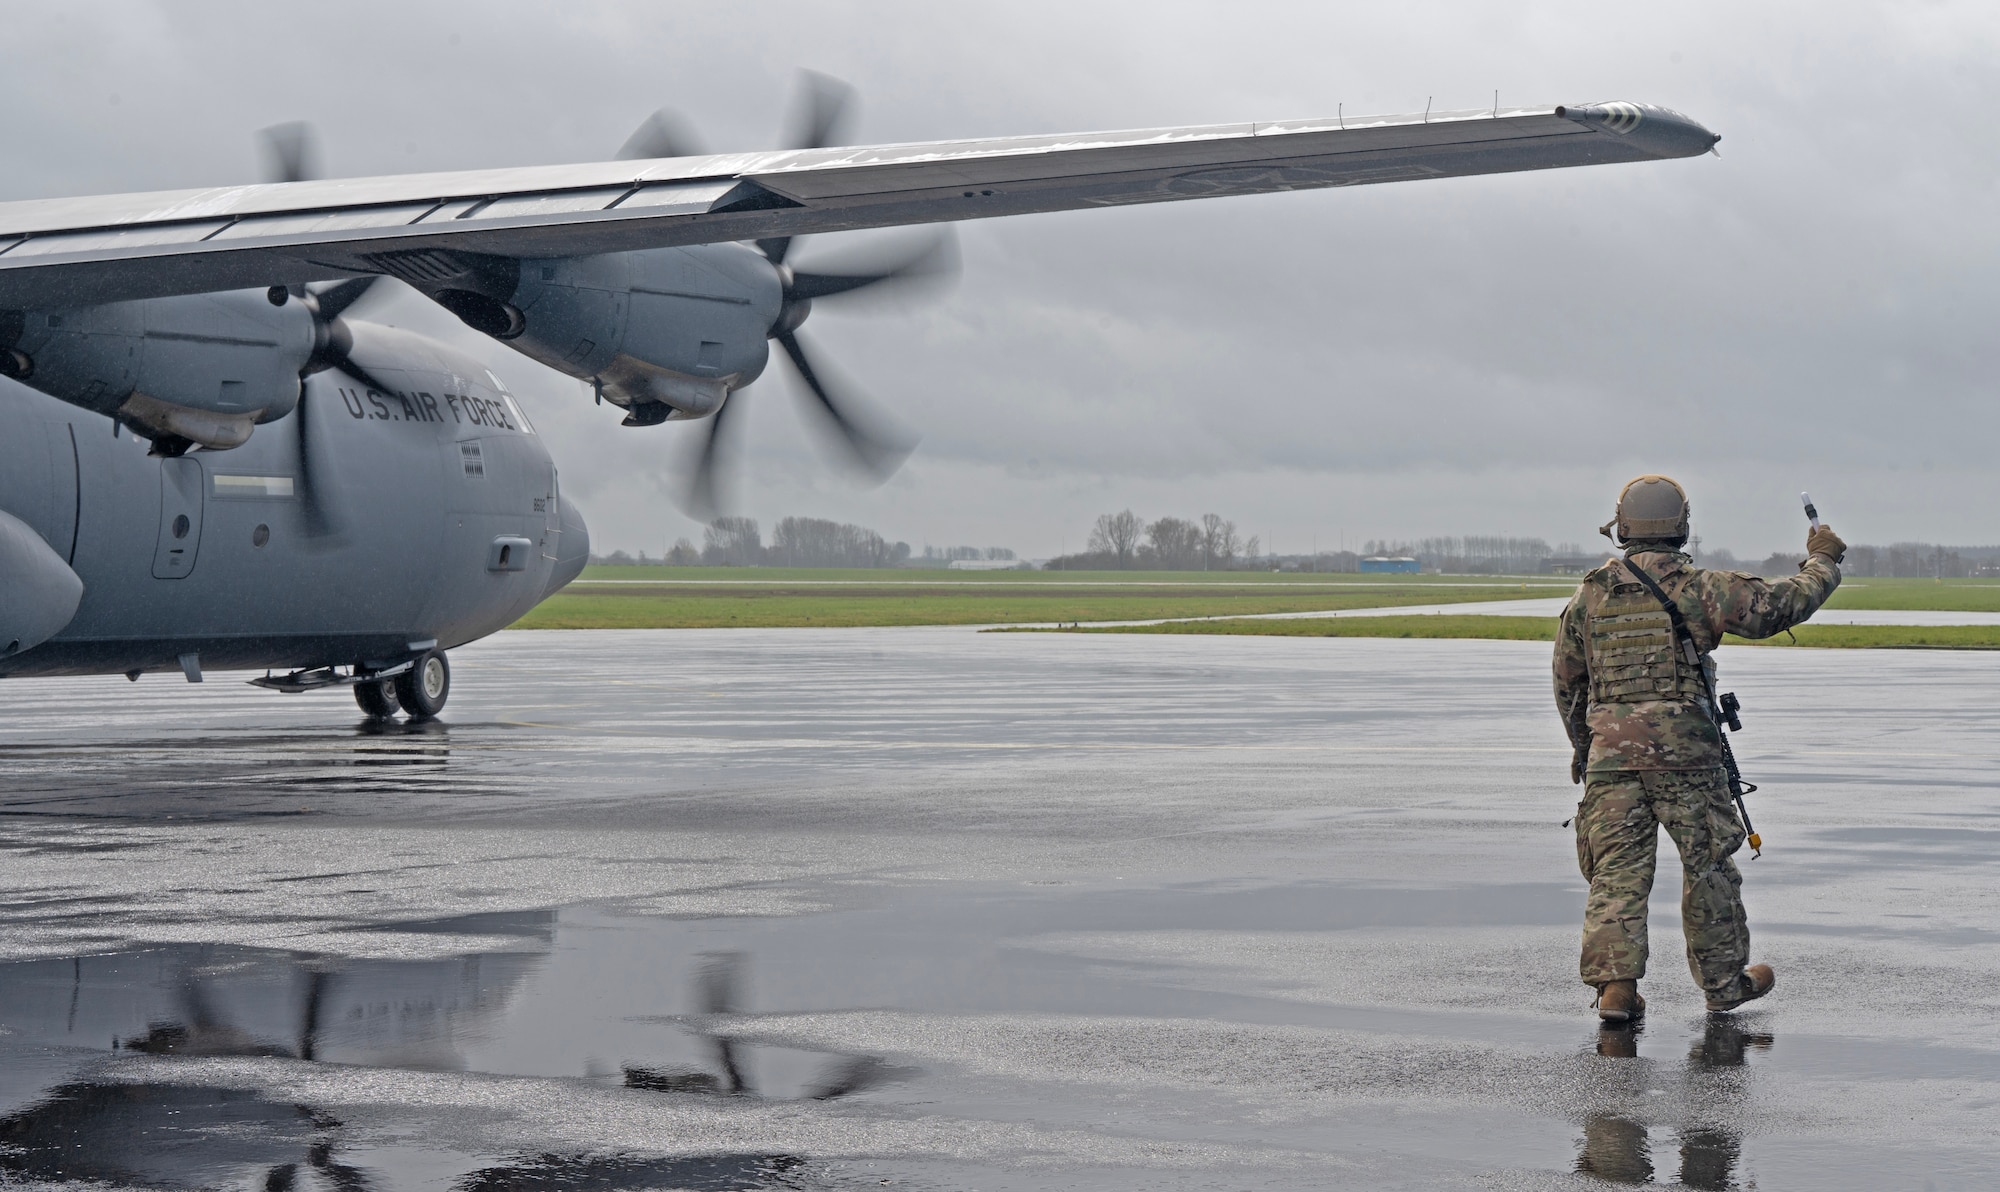 U.S. Air Force Senior Airman Freddyjames Atwood, 435th Contingency Response Squadron contingency response aerospace maintenance craftsman, marshals a C-130J Super Hercules cargo aircraft prior to taking off at Chièvres Air Base, Belgium, during Exercise Agile Bison, March 9, 2023.